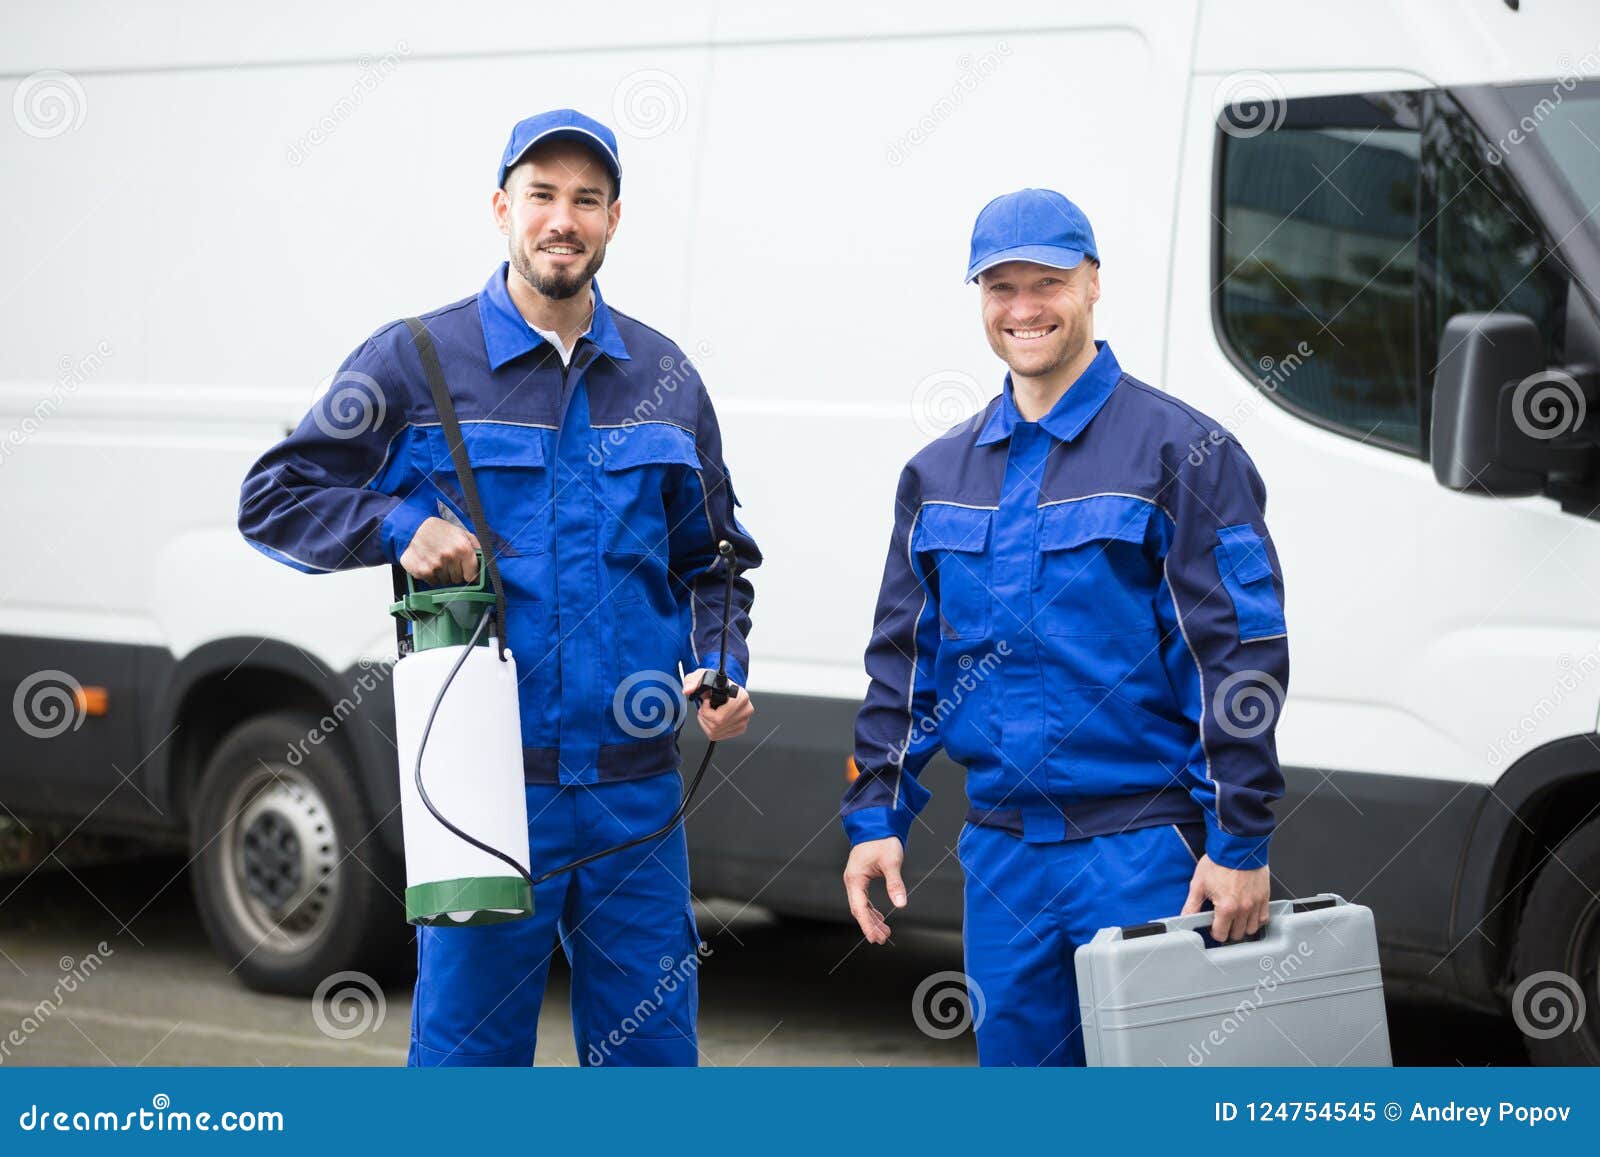 portrait of two pest control workers